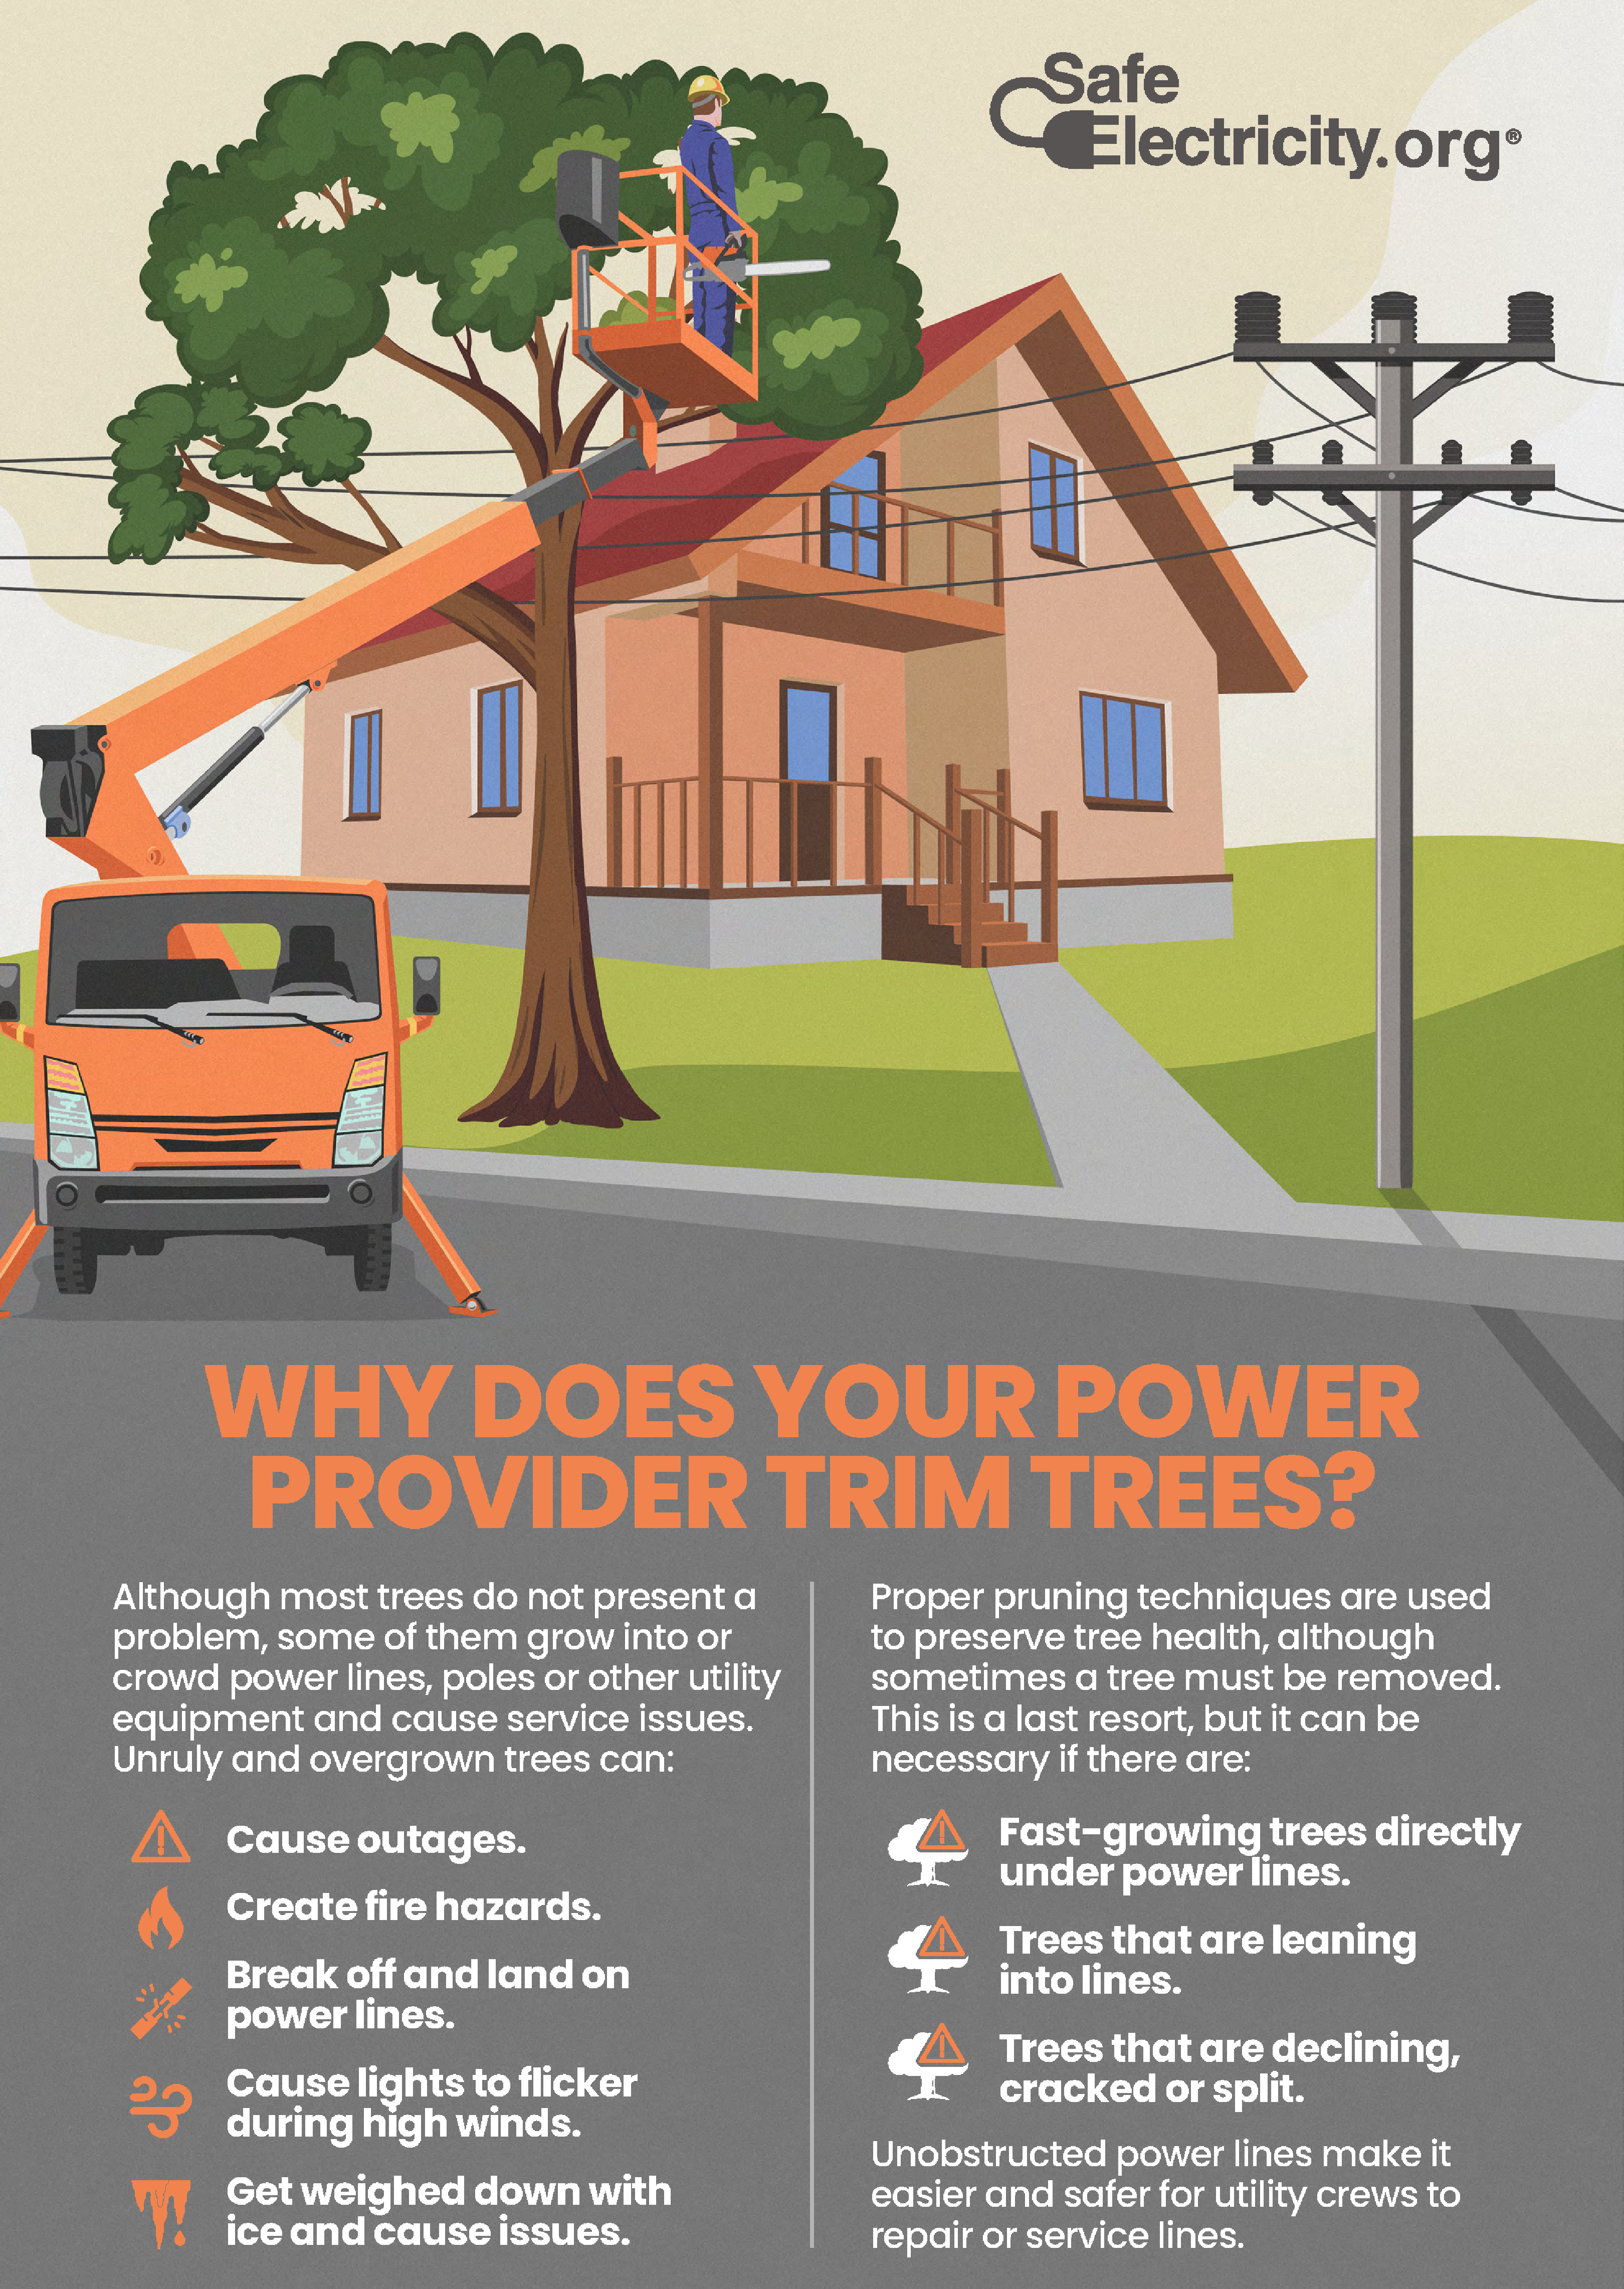 WHY DOES YOUR POWER PROVIDER TRIM TREES? Although most trees do not present a problem, some of them grow into or crowd power lines, poles, or other utility equipment and cause service issues. Unruly and overgrown trees can: Cause outages, Create fire hazards, Break off and land on power lines, Cause lights to flicker during high winds, Get weighed down with ice and cause issues. Proper pruning techniques are used to preserve tree health, although sometimes a tree must be removed. This is a last resort, but it can be necessary if there are: Fast-growing trees directly under power lines, Trees that are leaning into lins, Trees that are declining, cracked, or split. Unobstructed power lines make it easier and safer for utility crews to repair or service lines. Power companies trim trees to better serve you.